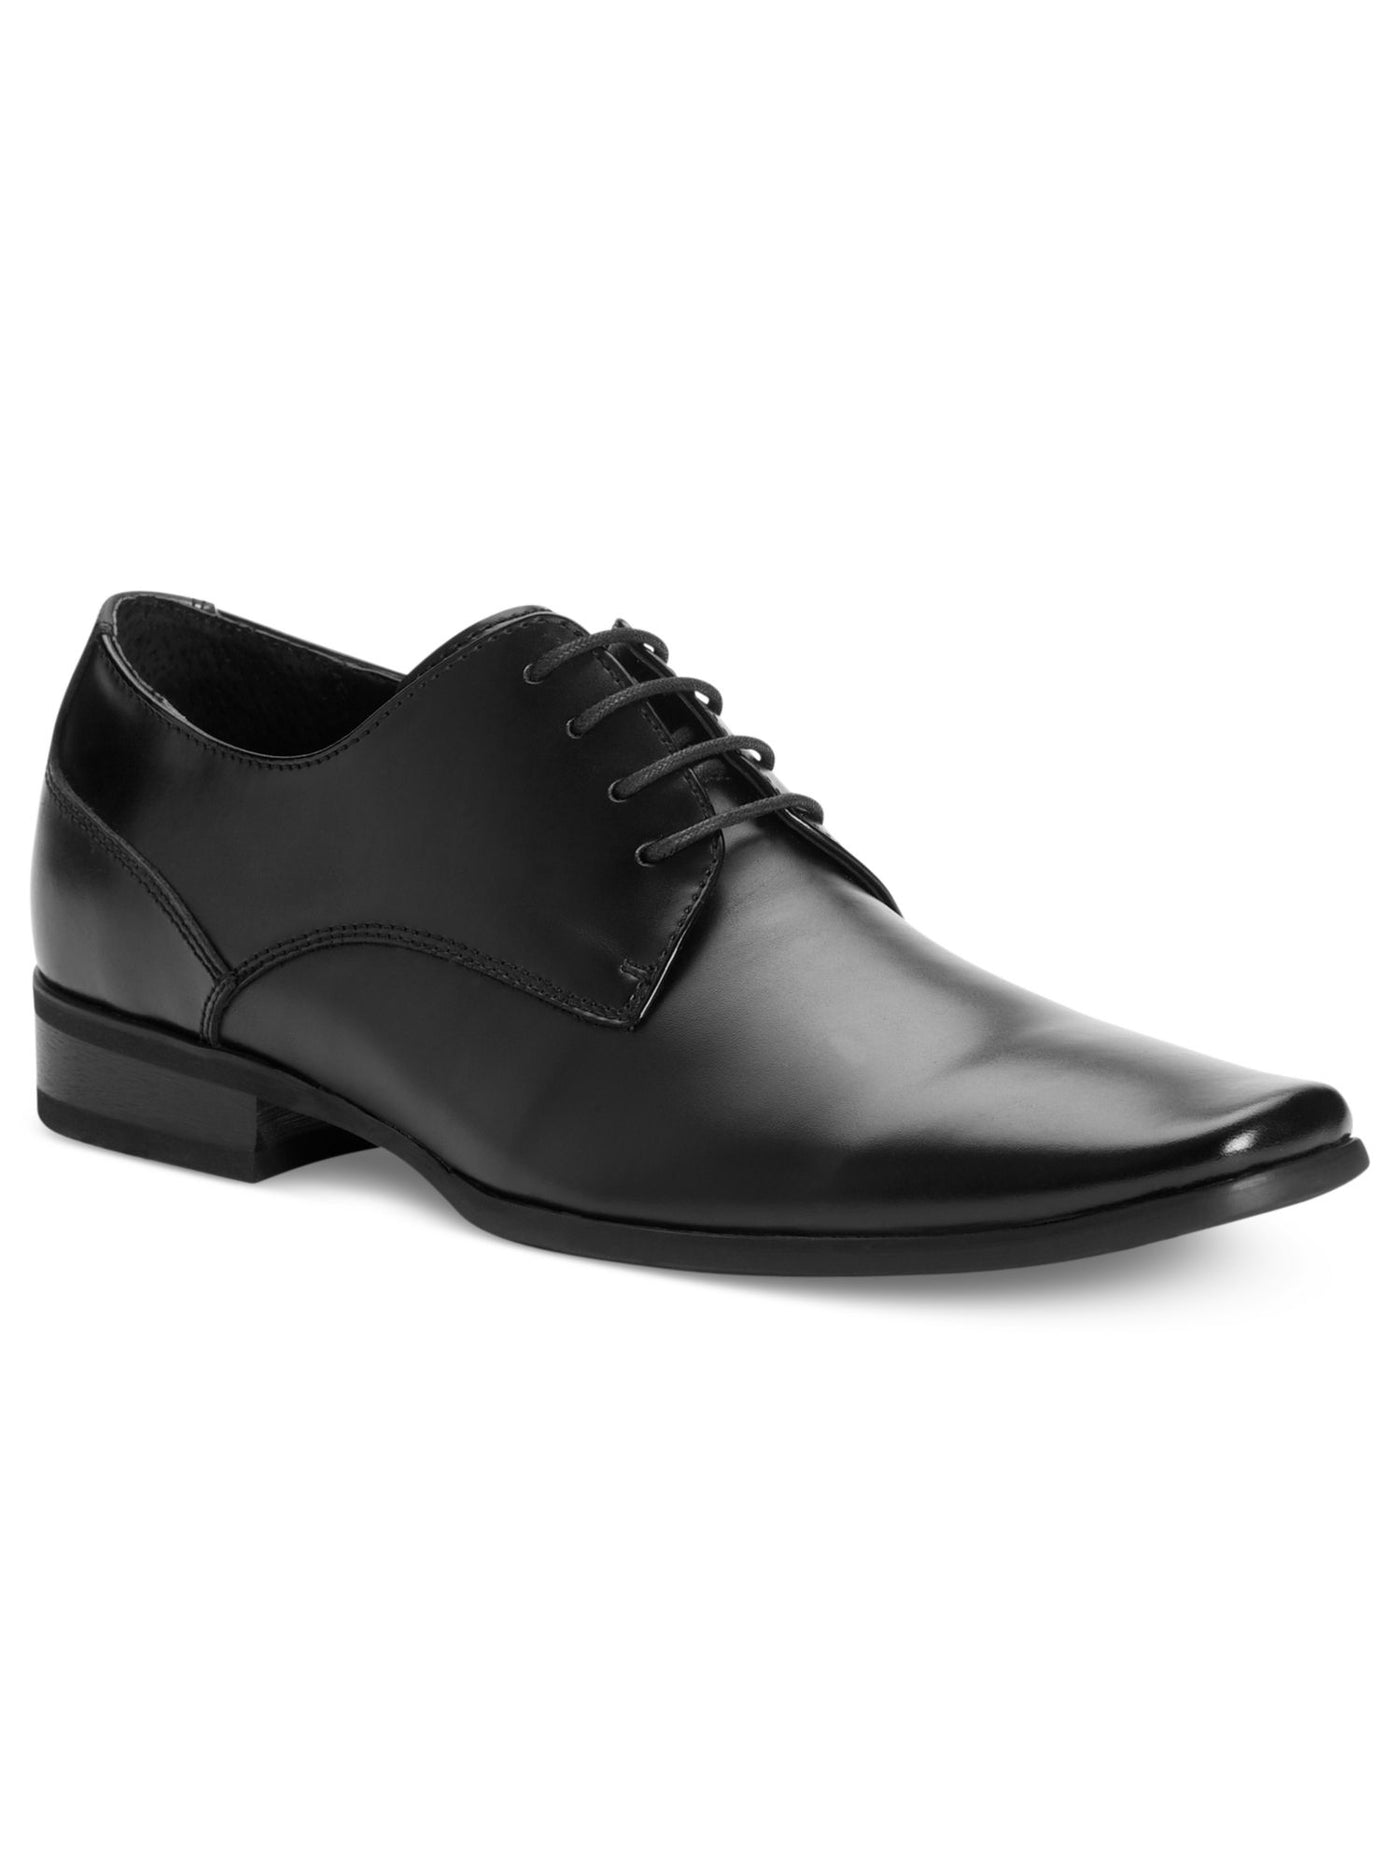 CALVIN KLEIN Mens Black Padded Brodie Square Toe Block Heel Lace-Up Leather Dress Oxford Shoes 9